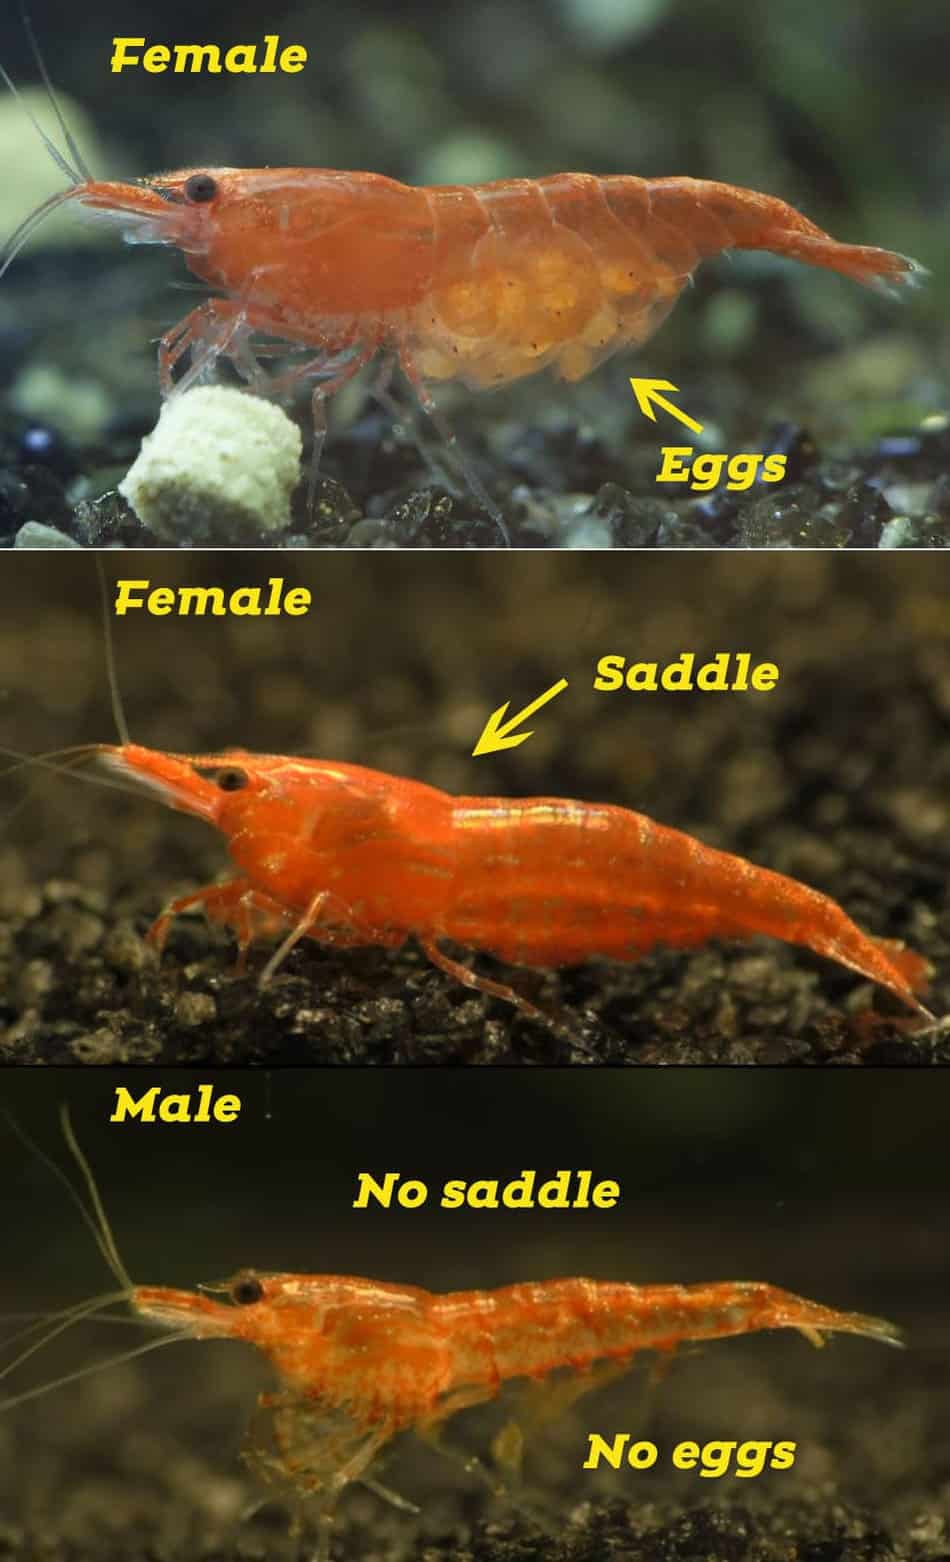 How can you tell the difference between a male and female Neocaridina?